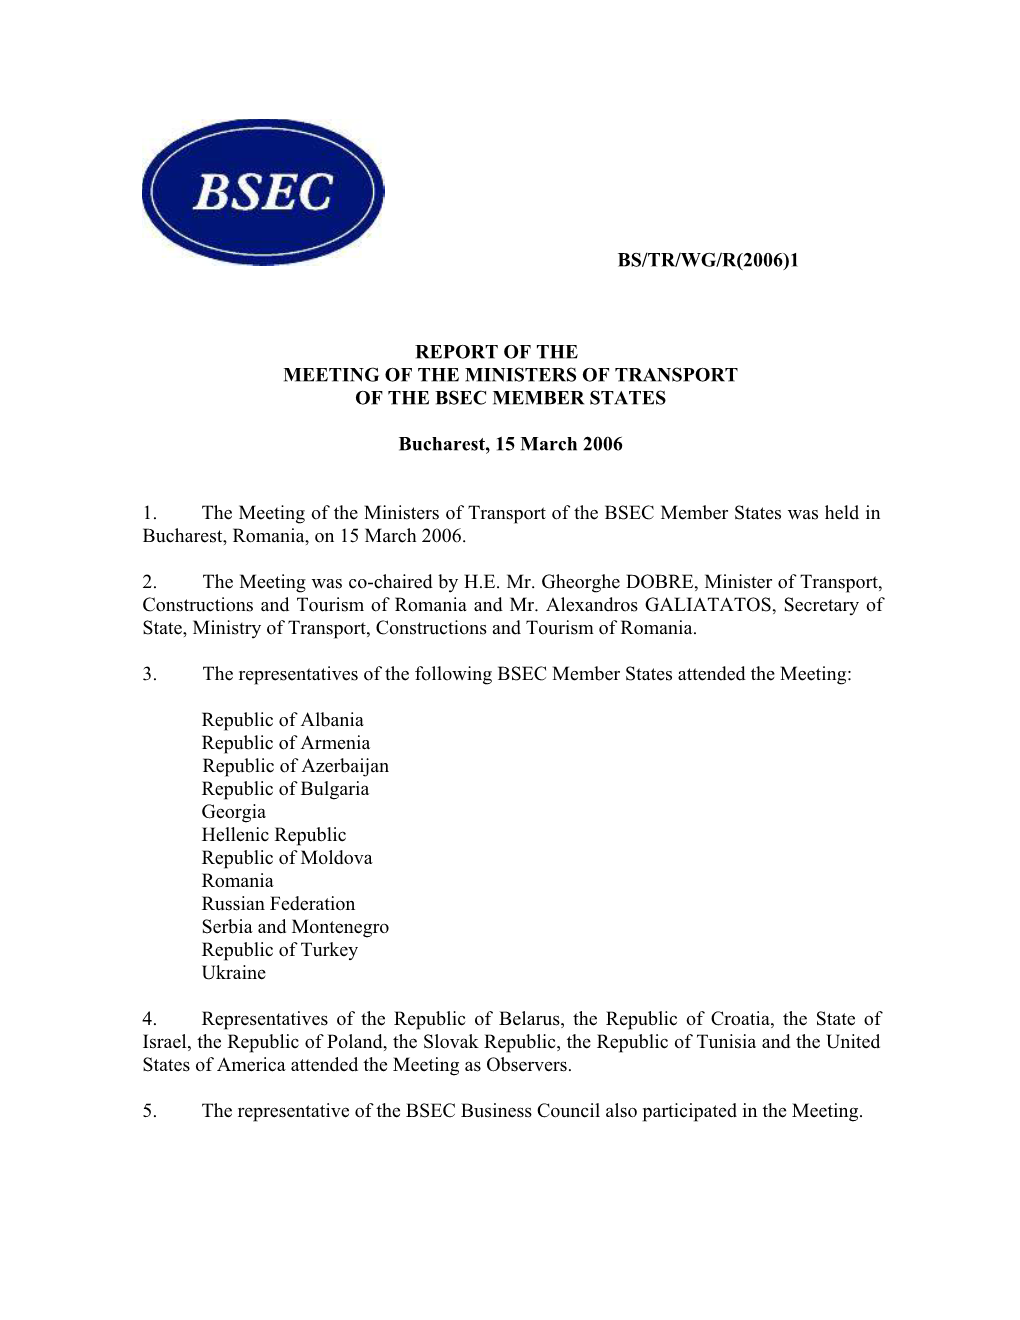 Report of the Meeting of the Ministers of Transport of the Bsec Member States